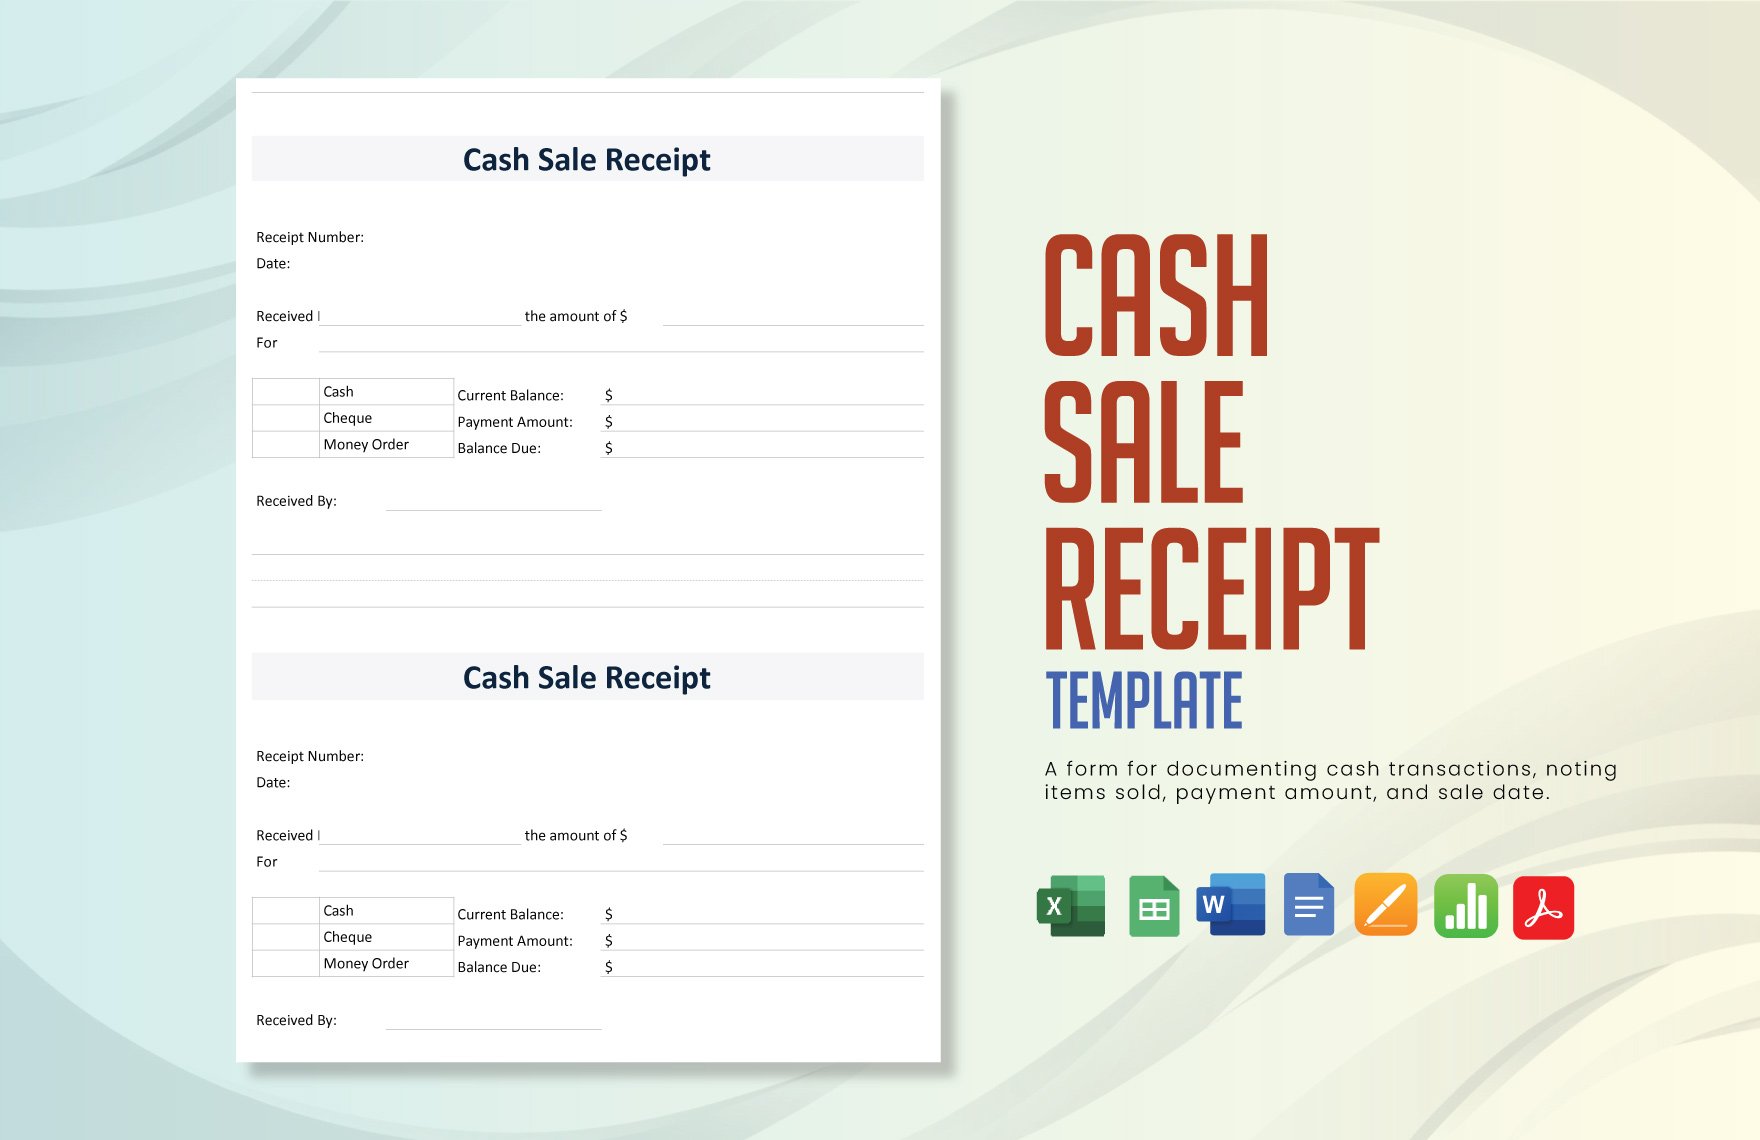 Cash Sale Receipt Template in Word, Google Docs, Excel, PDF, Google Sheets, Apple Pages, Apple Numbers